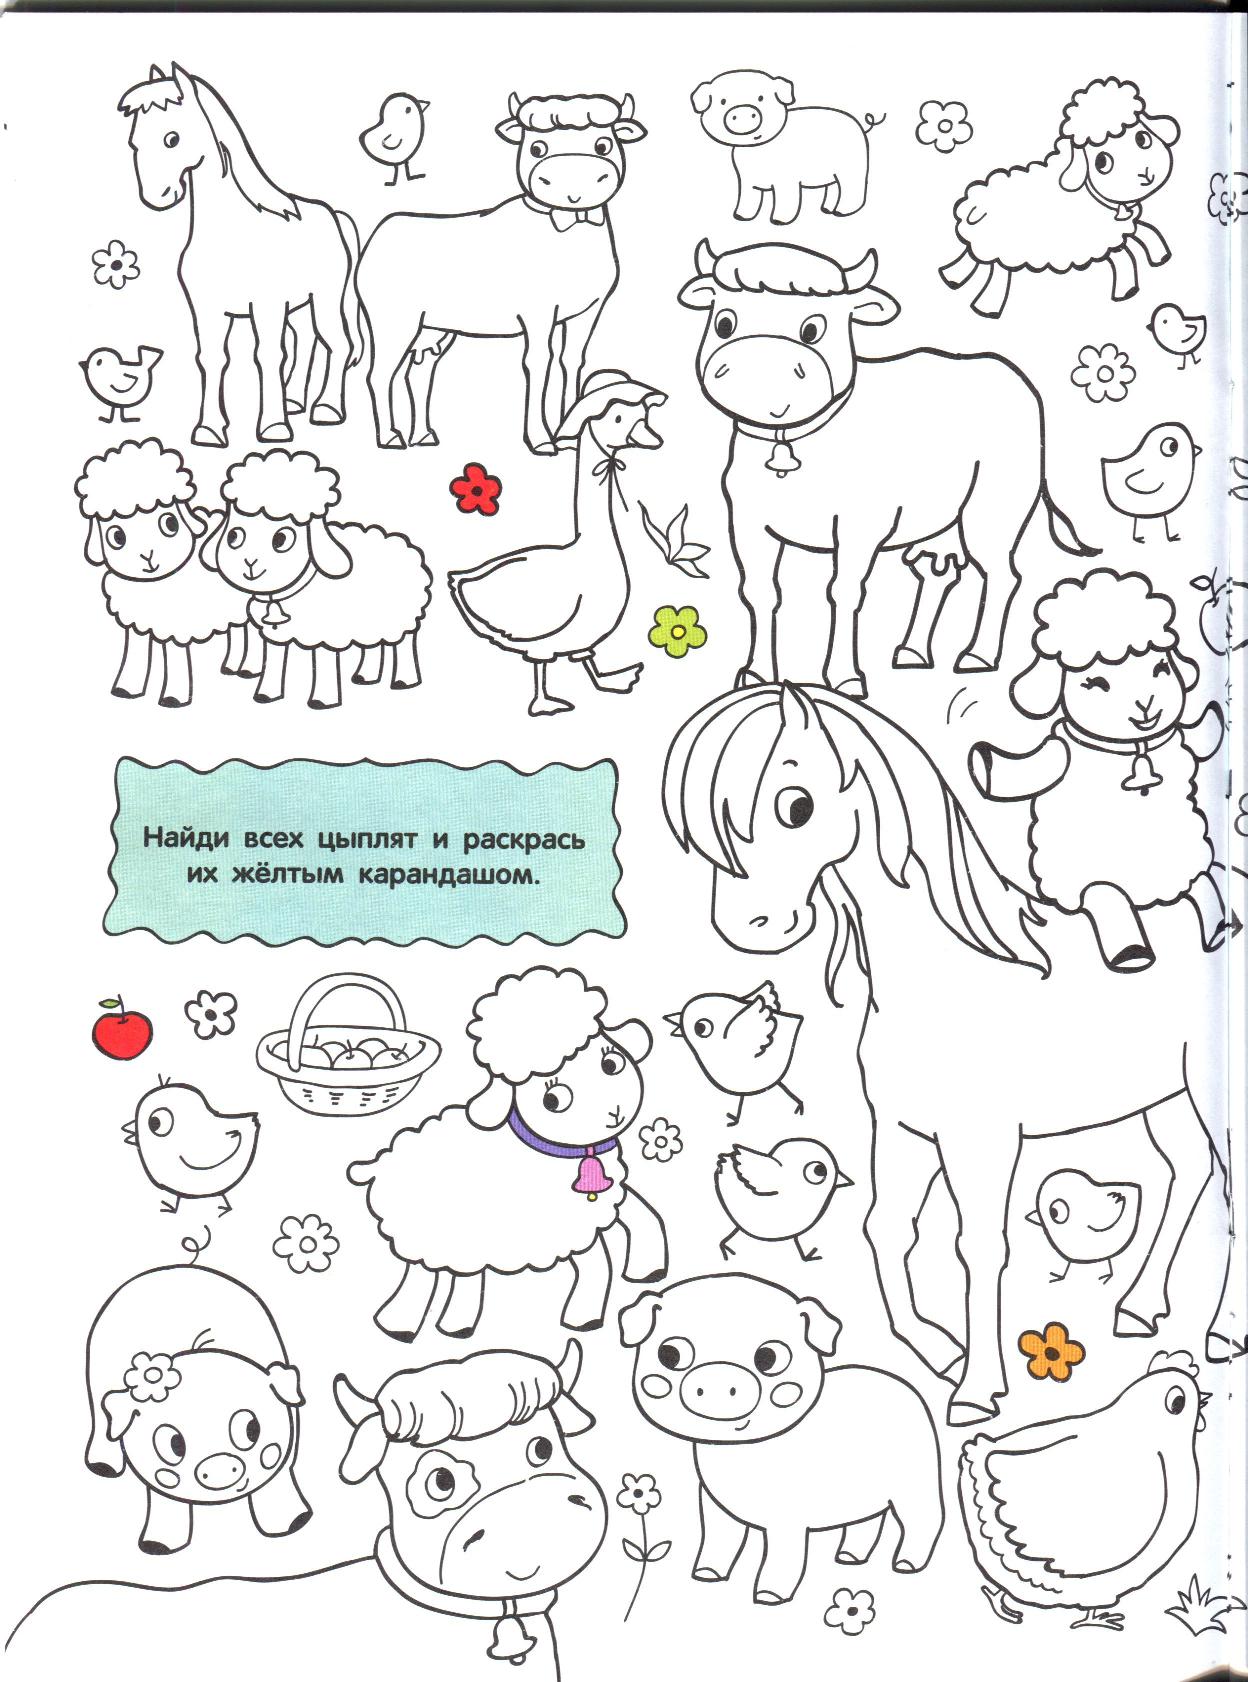 Awesome animal coloring pages with clothes